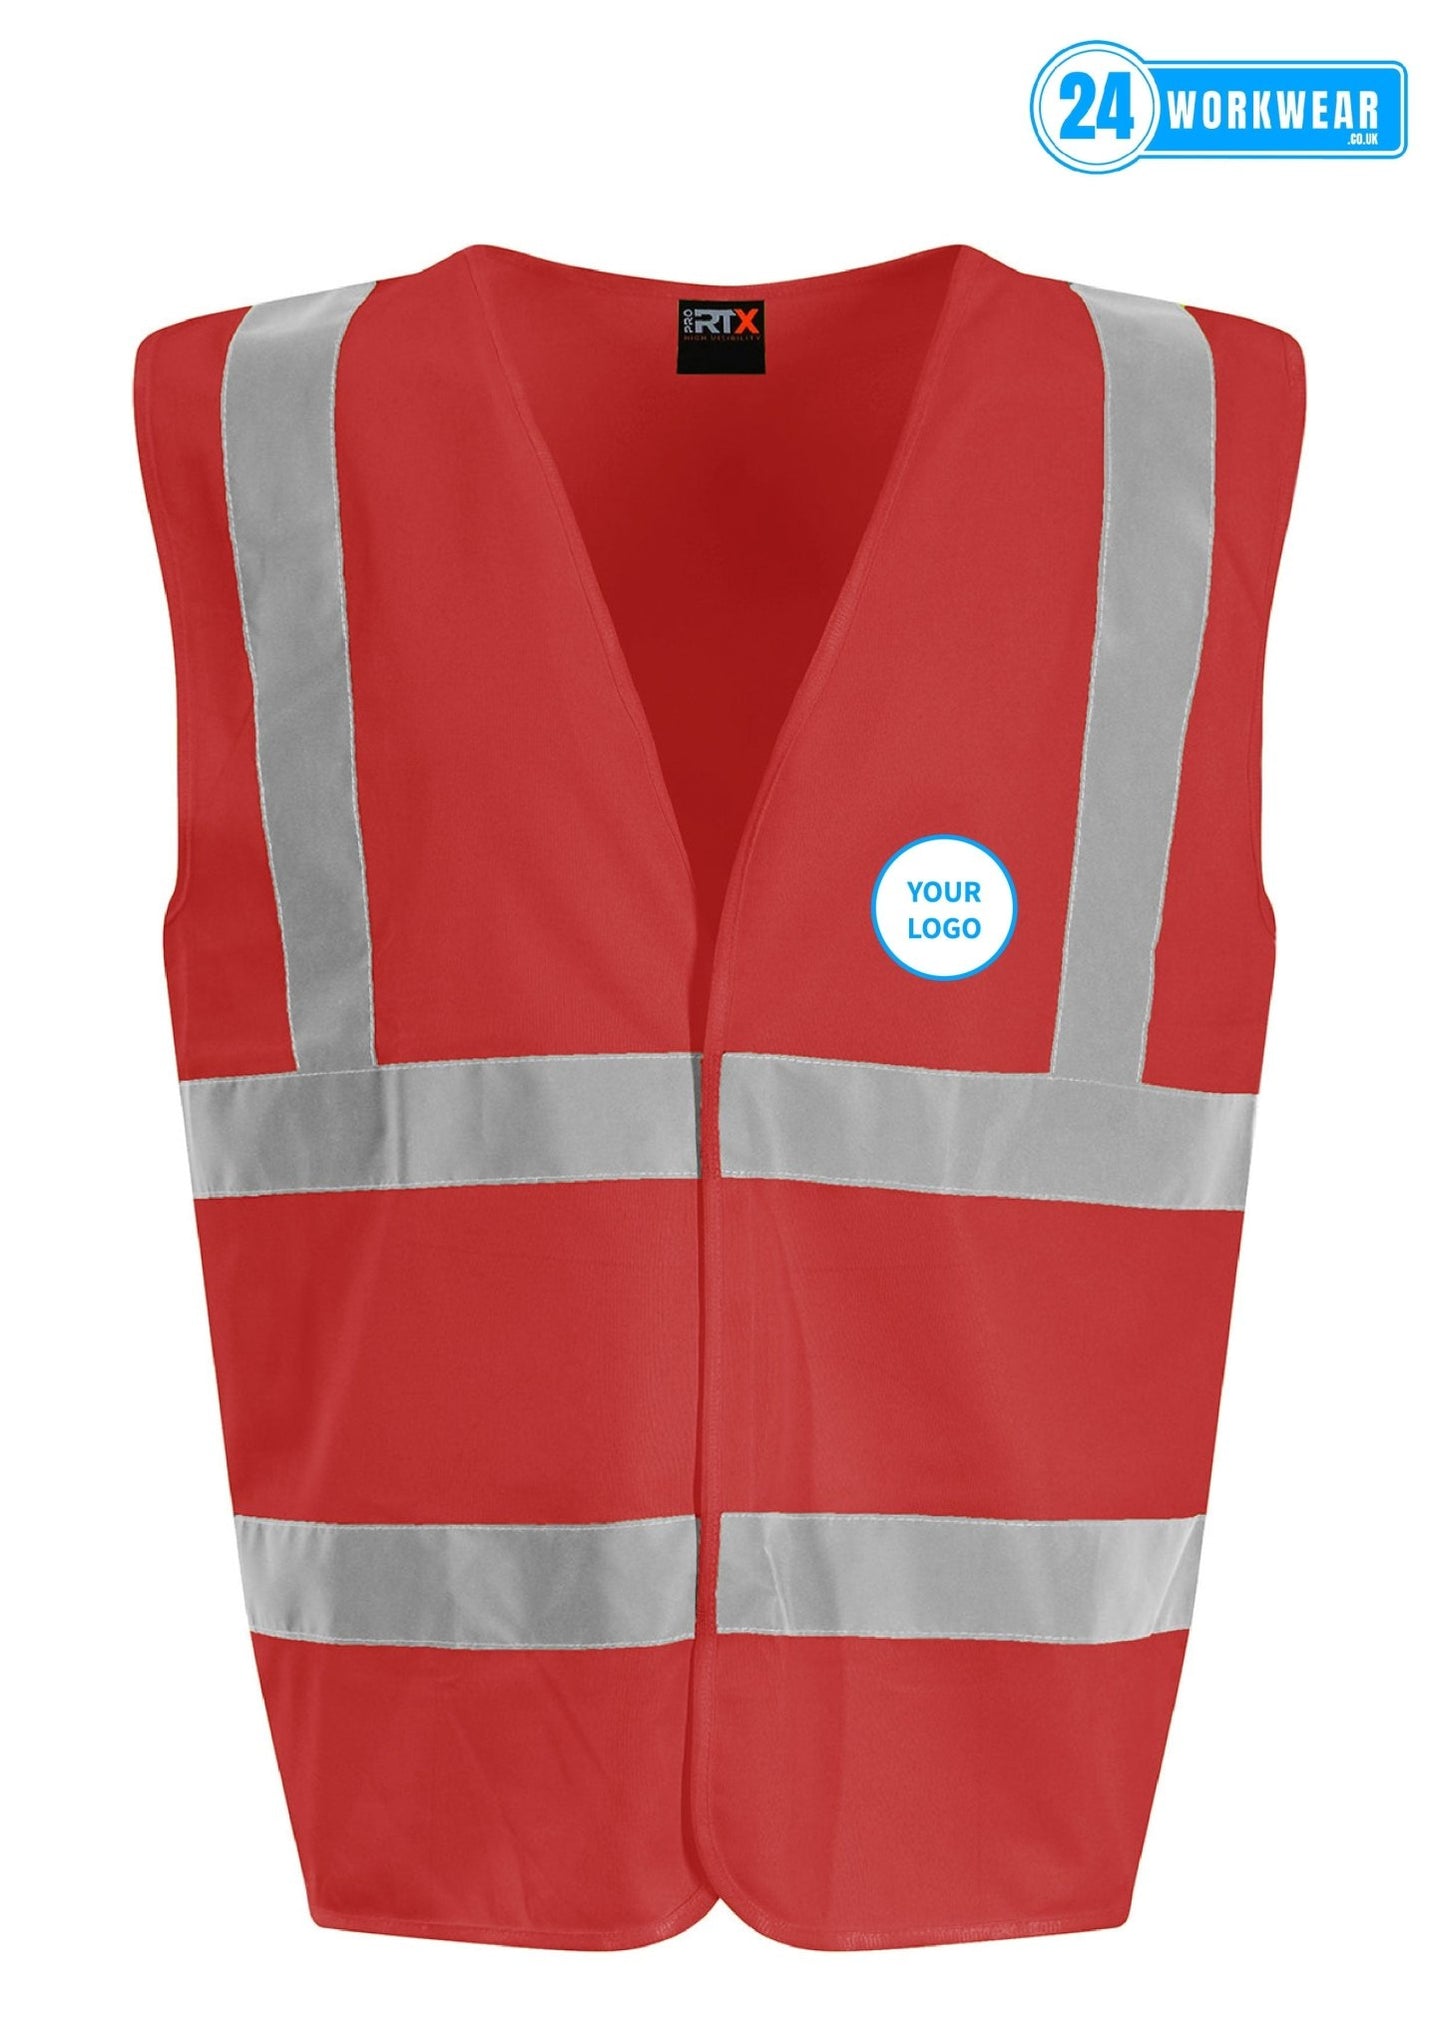 4 x High Visibility Waistcoat Deal - 24 Workwear - High Visibility